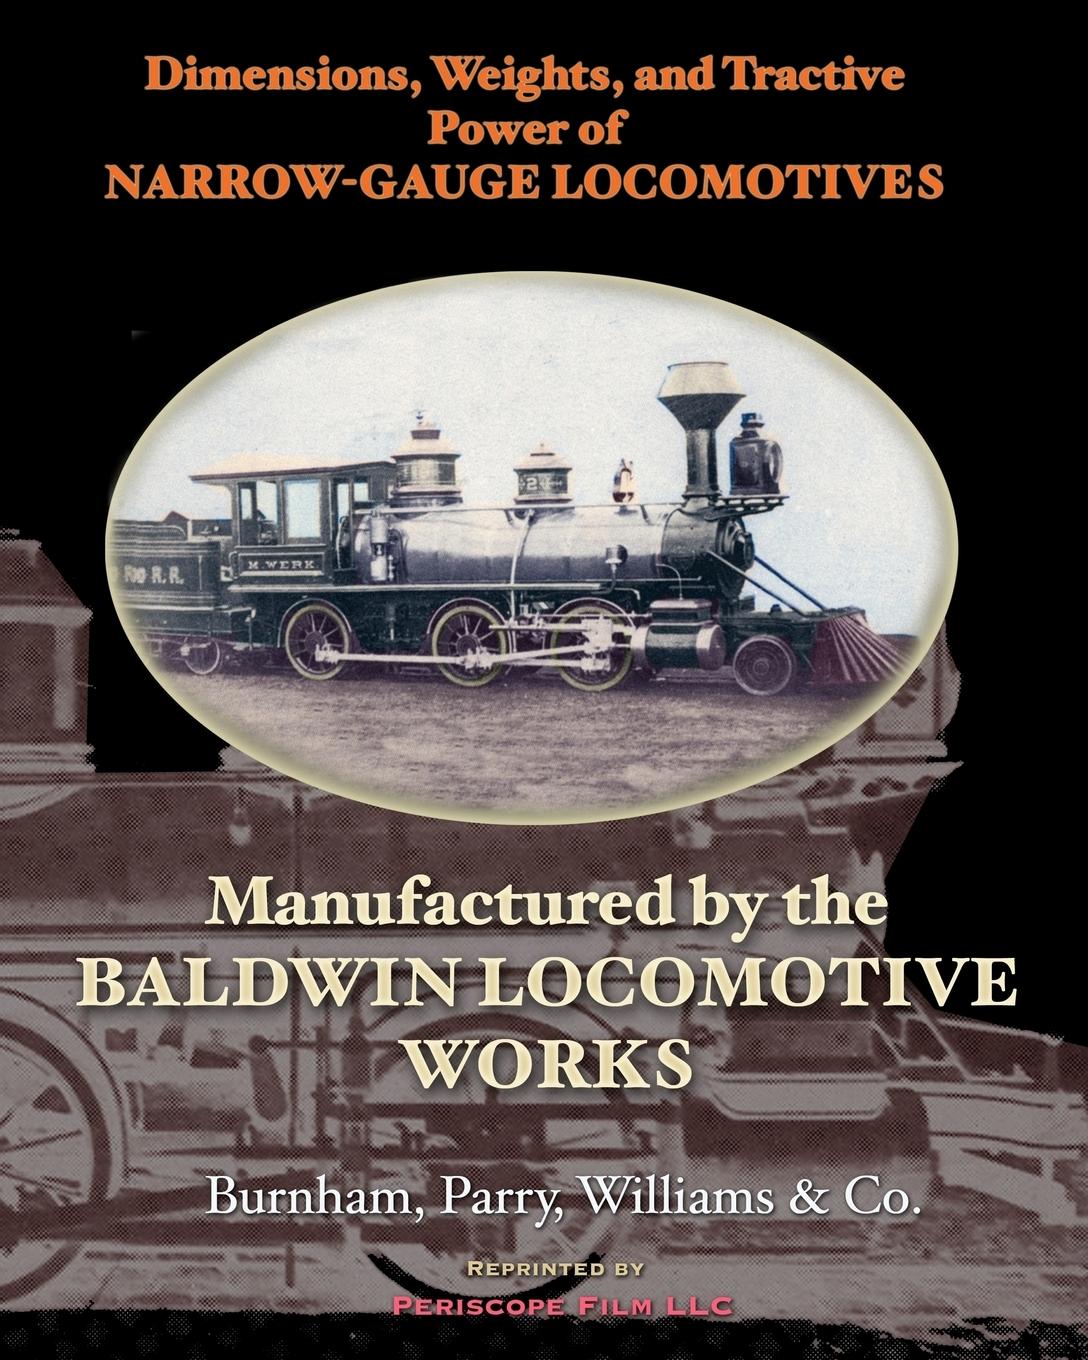 Dimensions, Weights, and Tractive Power of Narrow-Gauge Locomotives - Co., Burnham Parry Williams